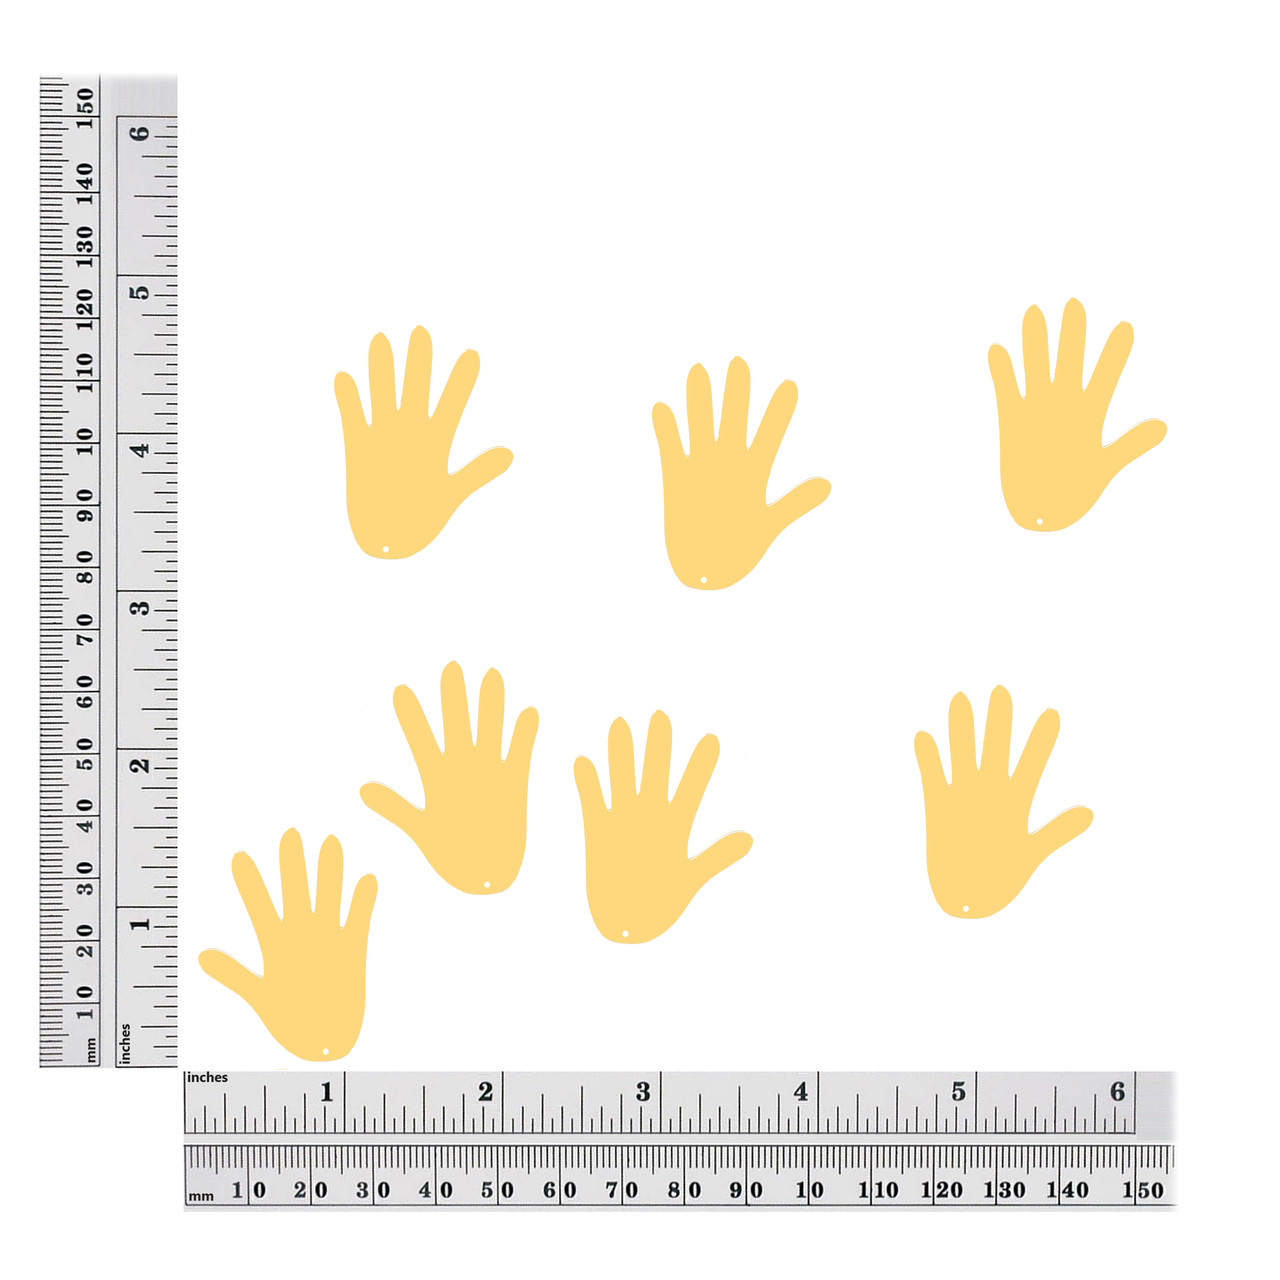 1-5-inch-glove-sequins size chart